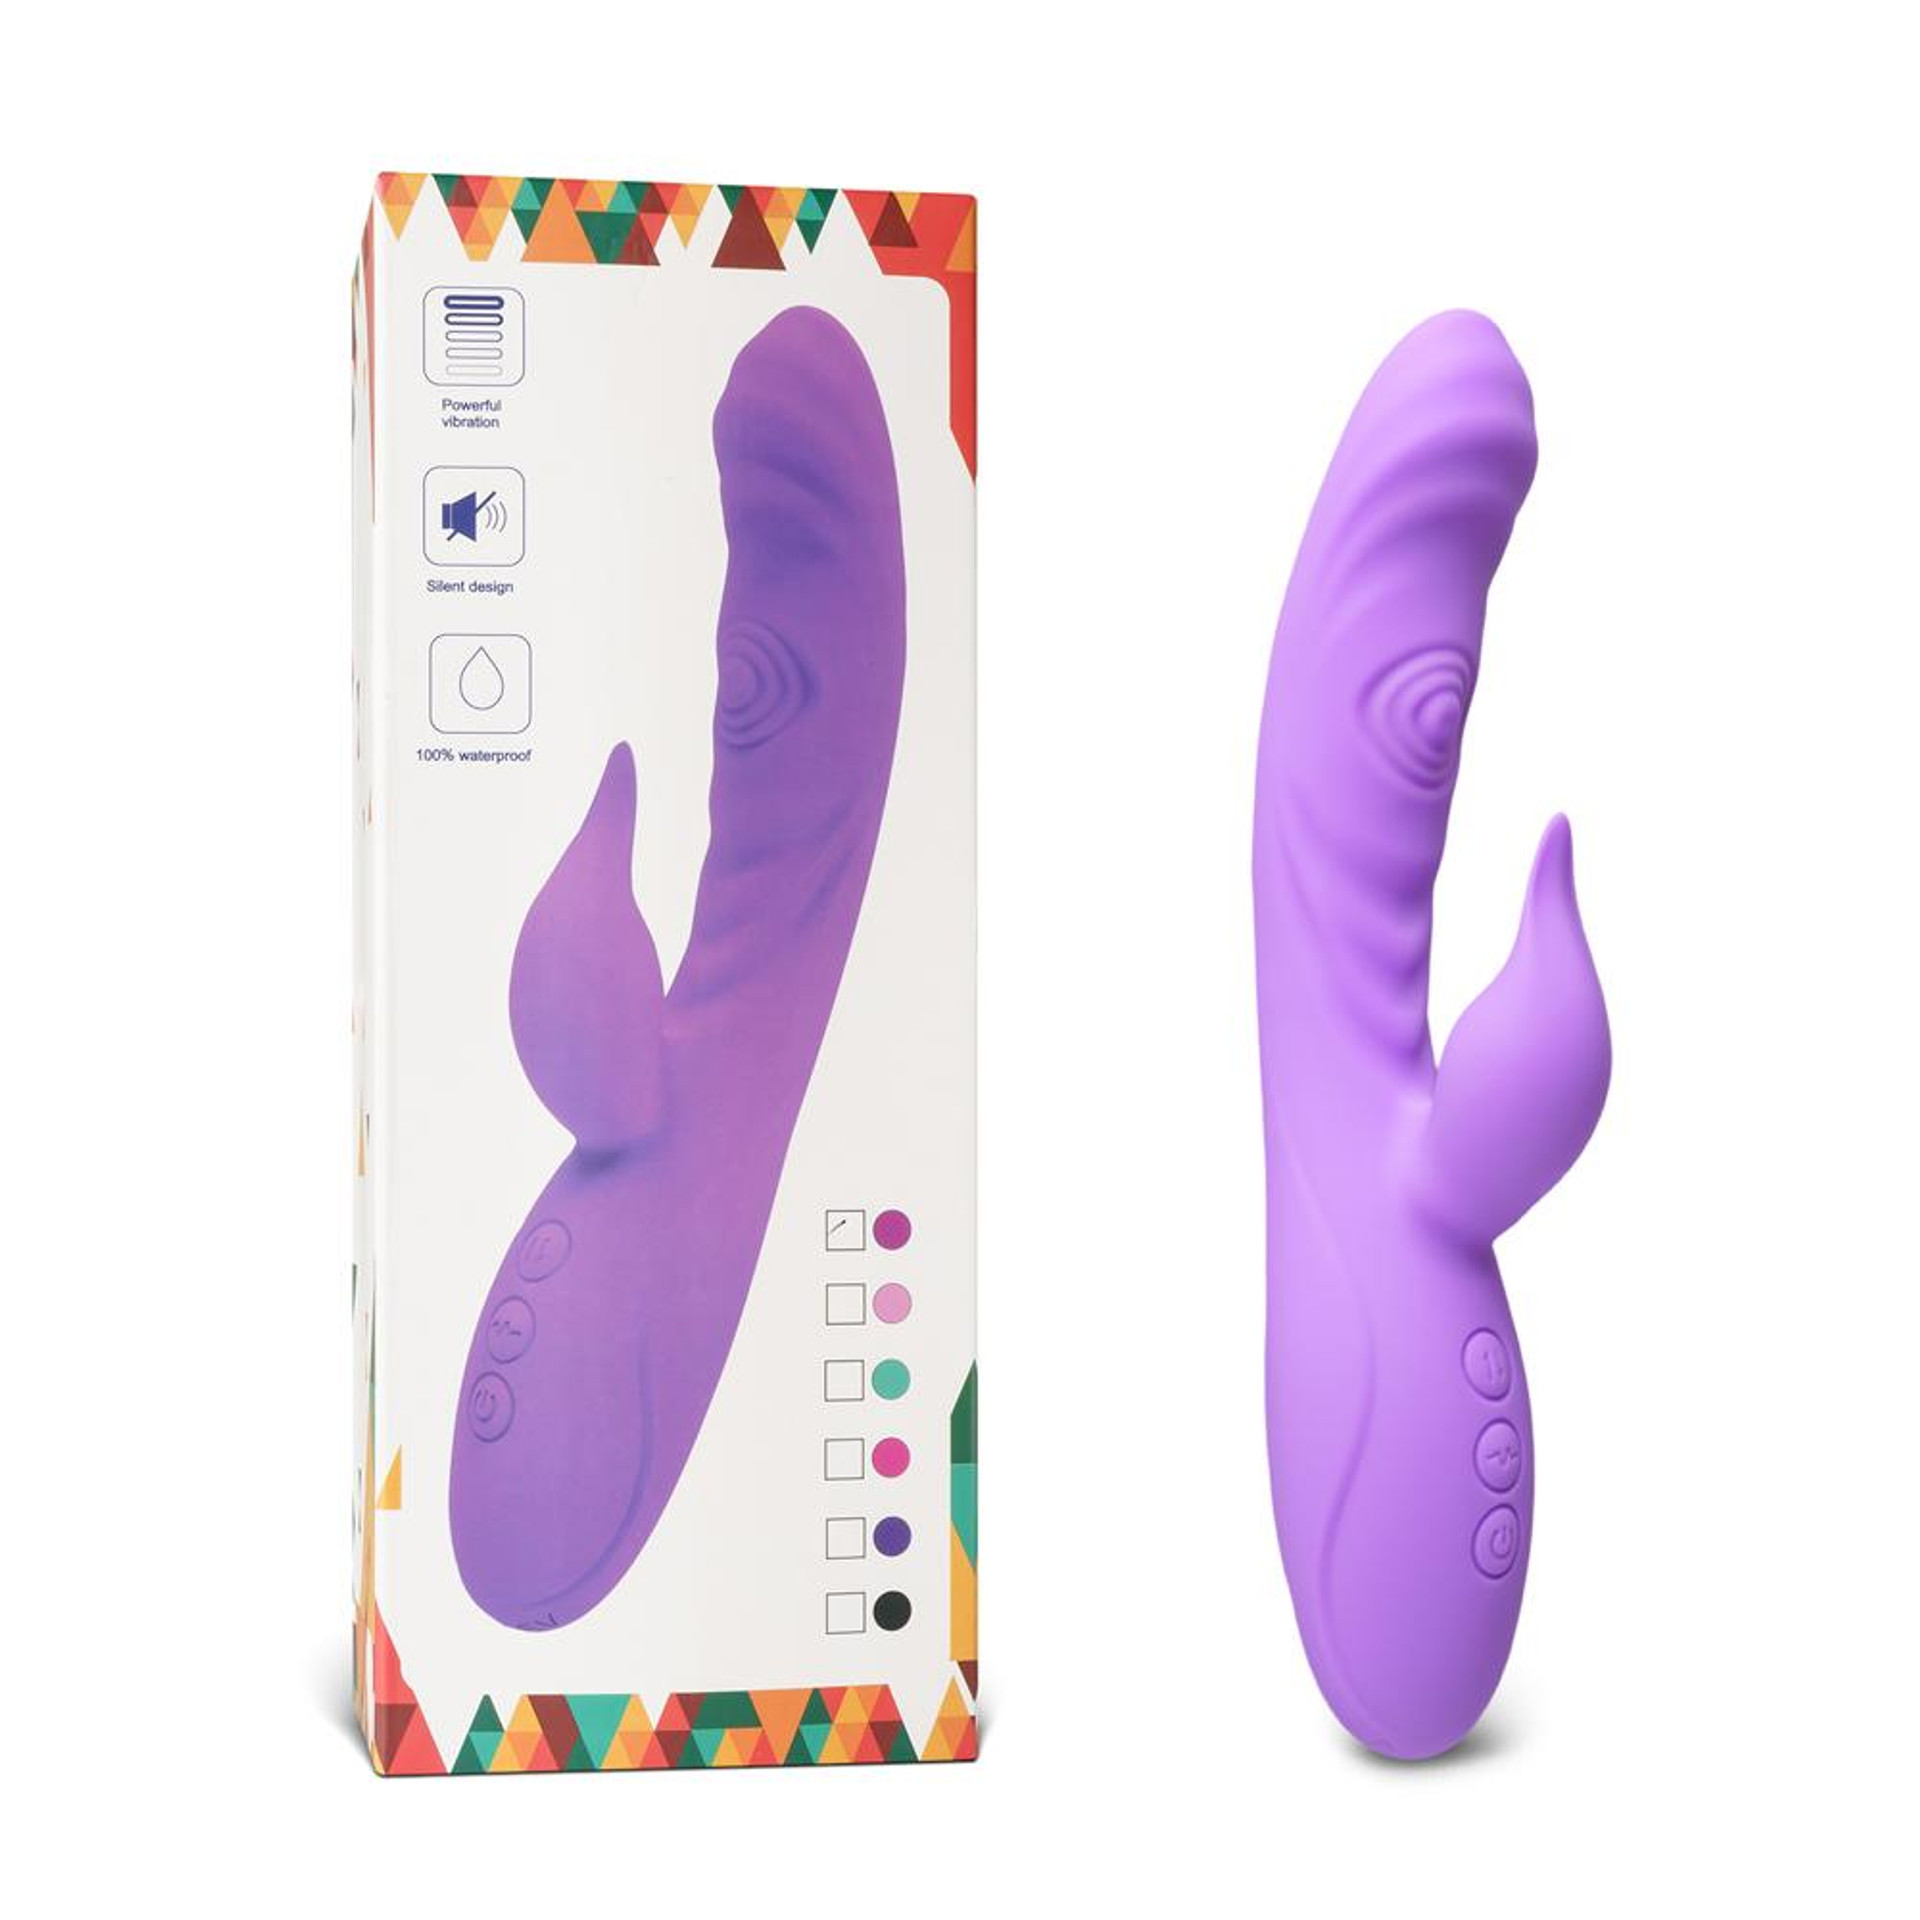 7-Speed Purple Color Silicone Rabbit Vibrator with Double Tapping Function